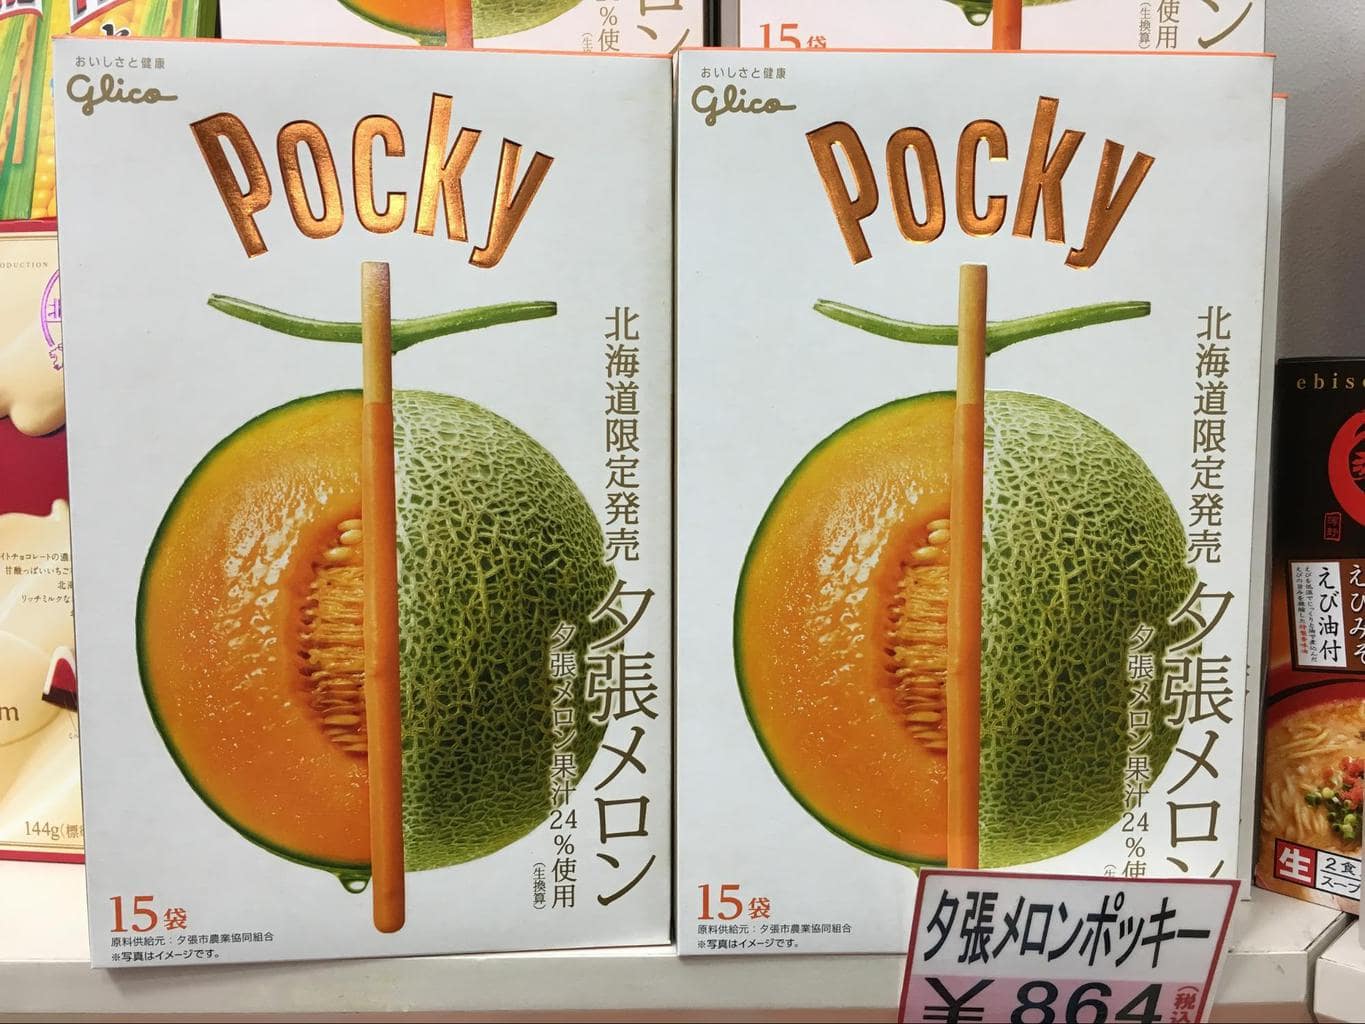 Interesting flavors of Pocky and Kit Kat